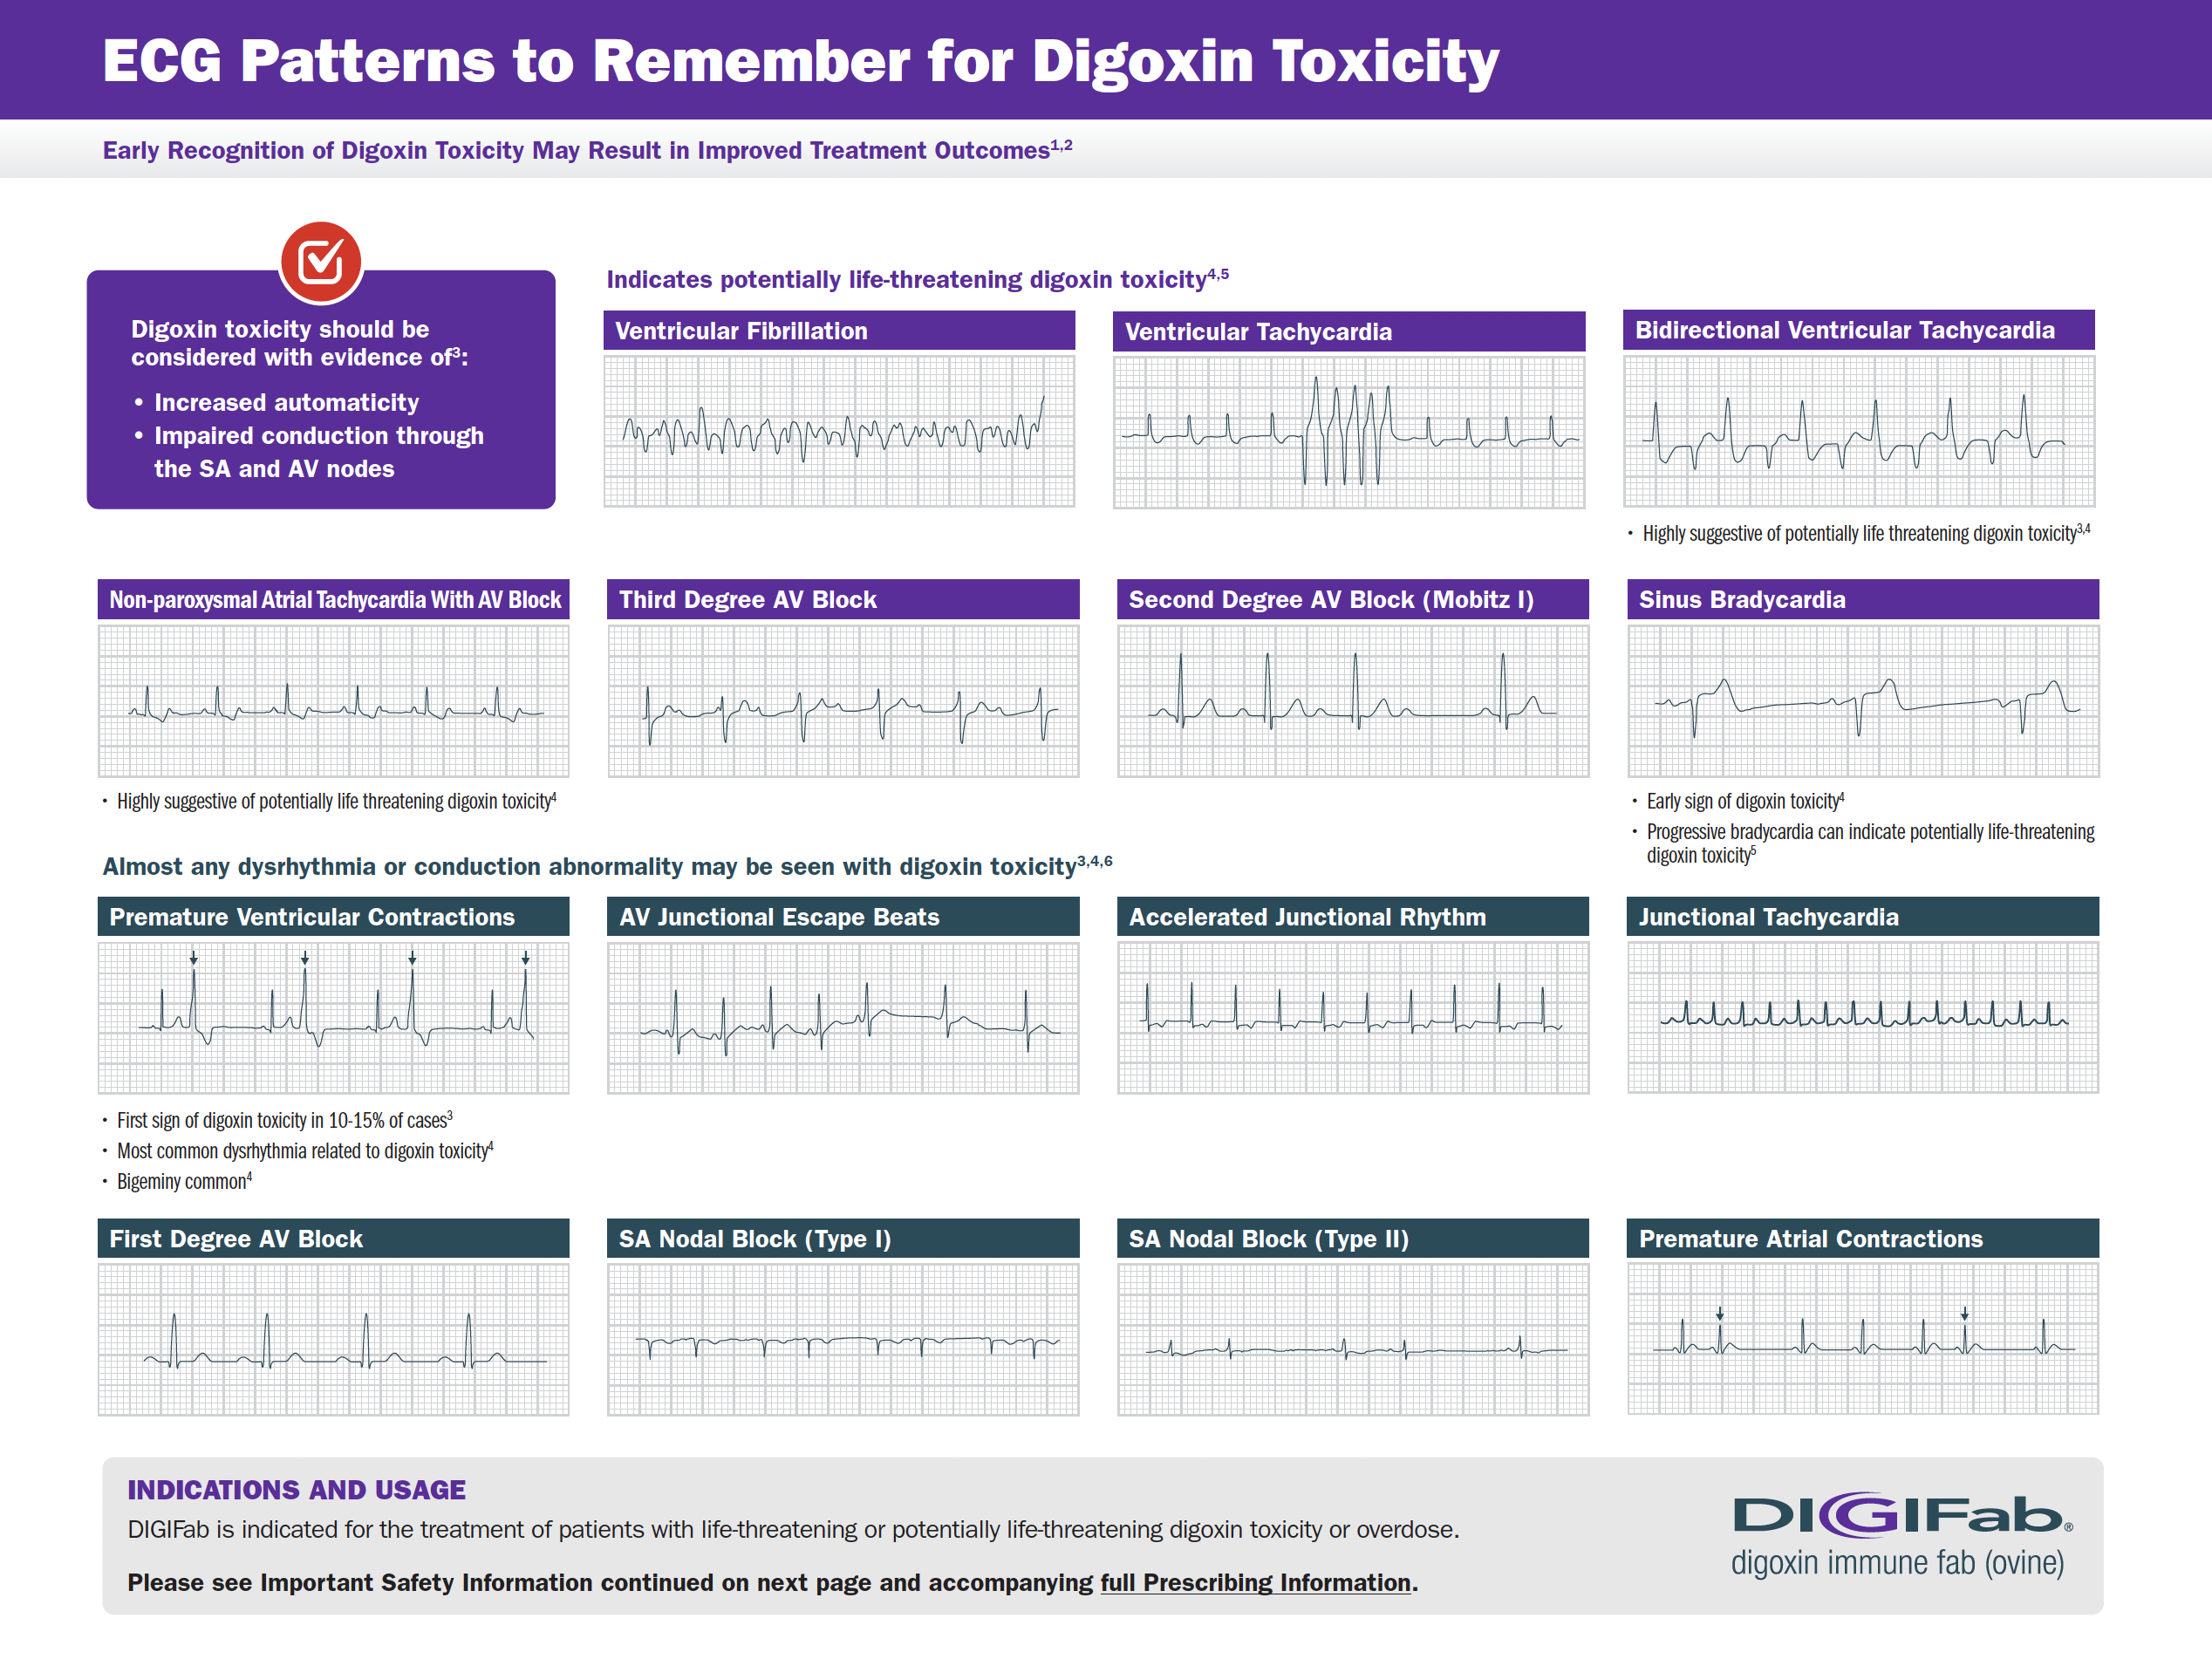 digoxin toxicity ecg reference tool image